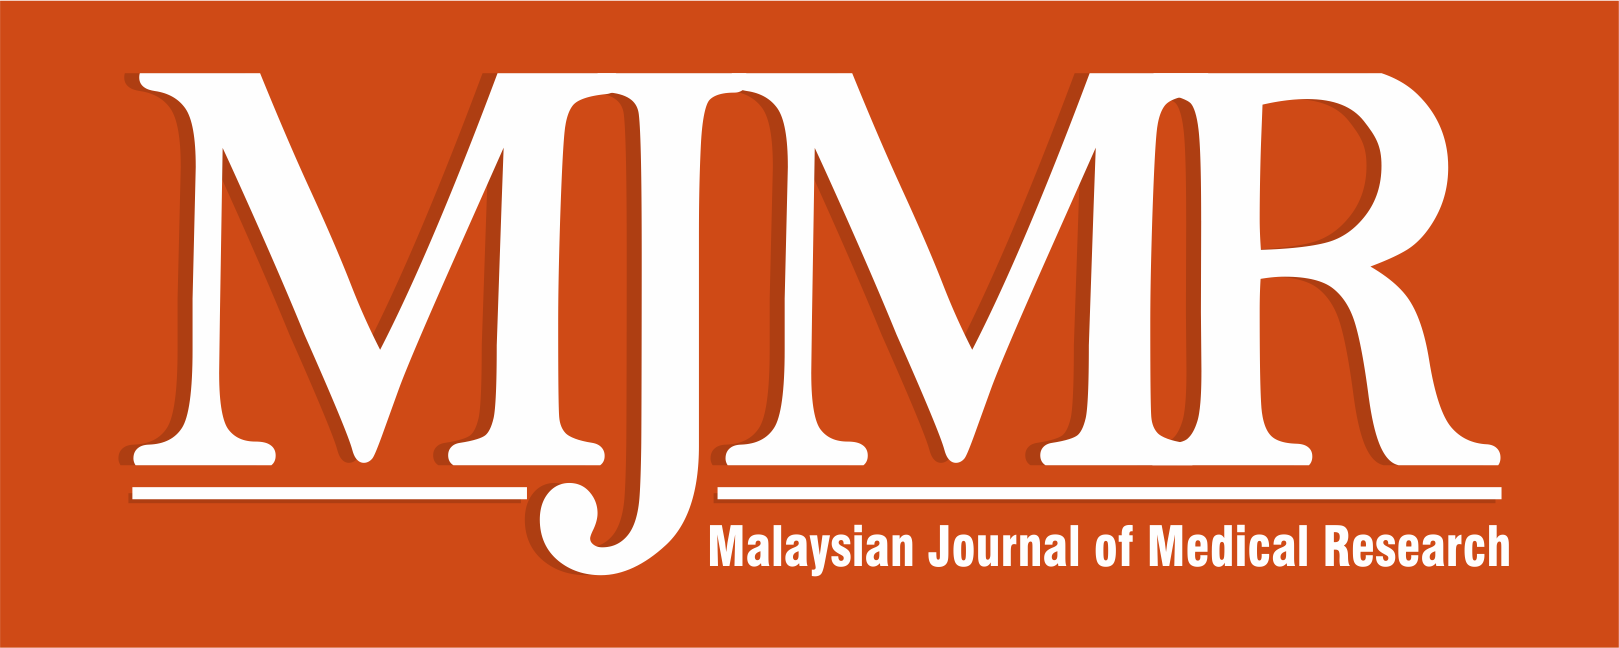 Malaysian Journal of Medical Research 